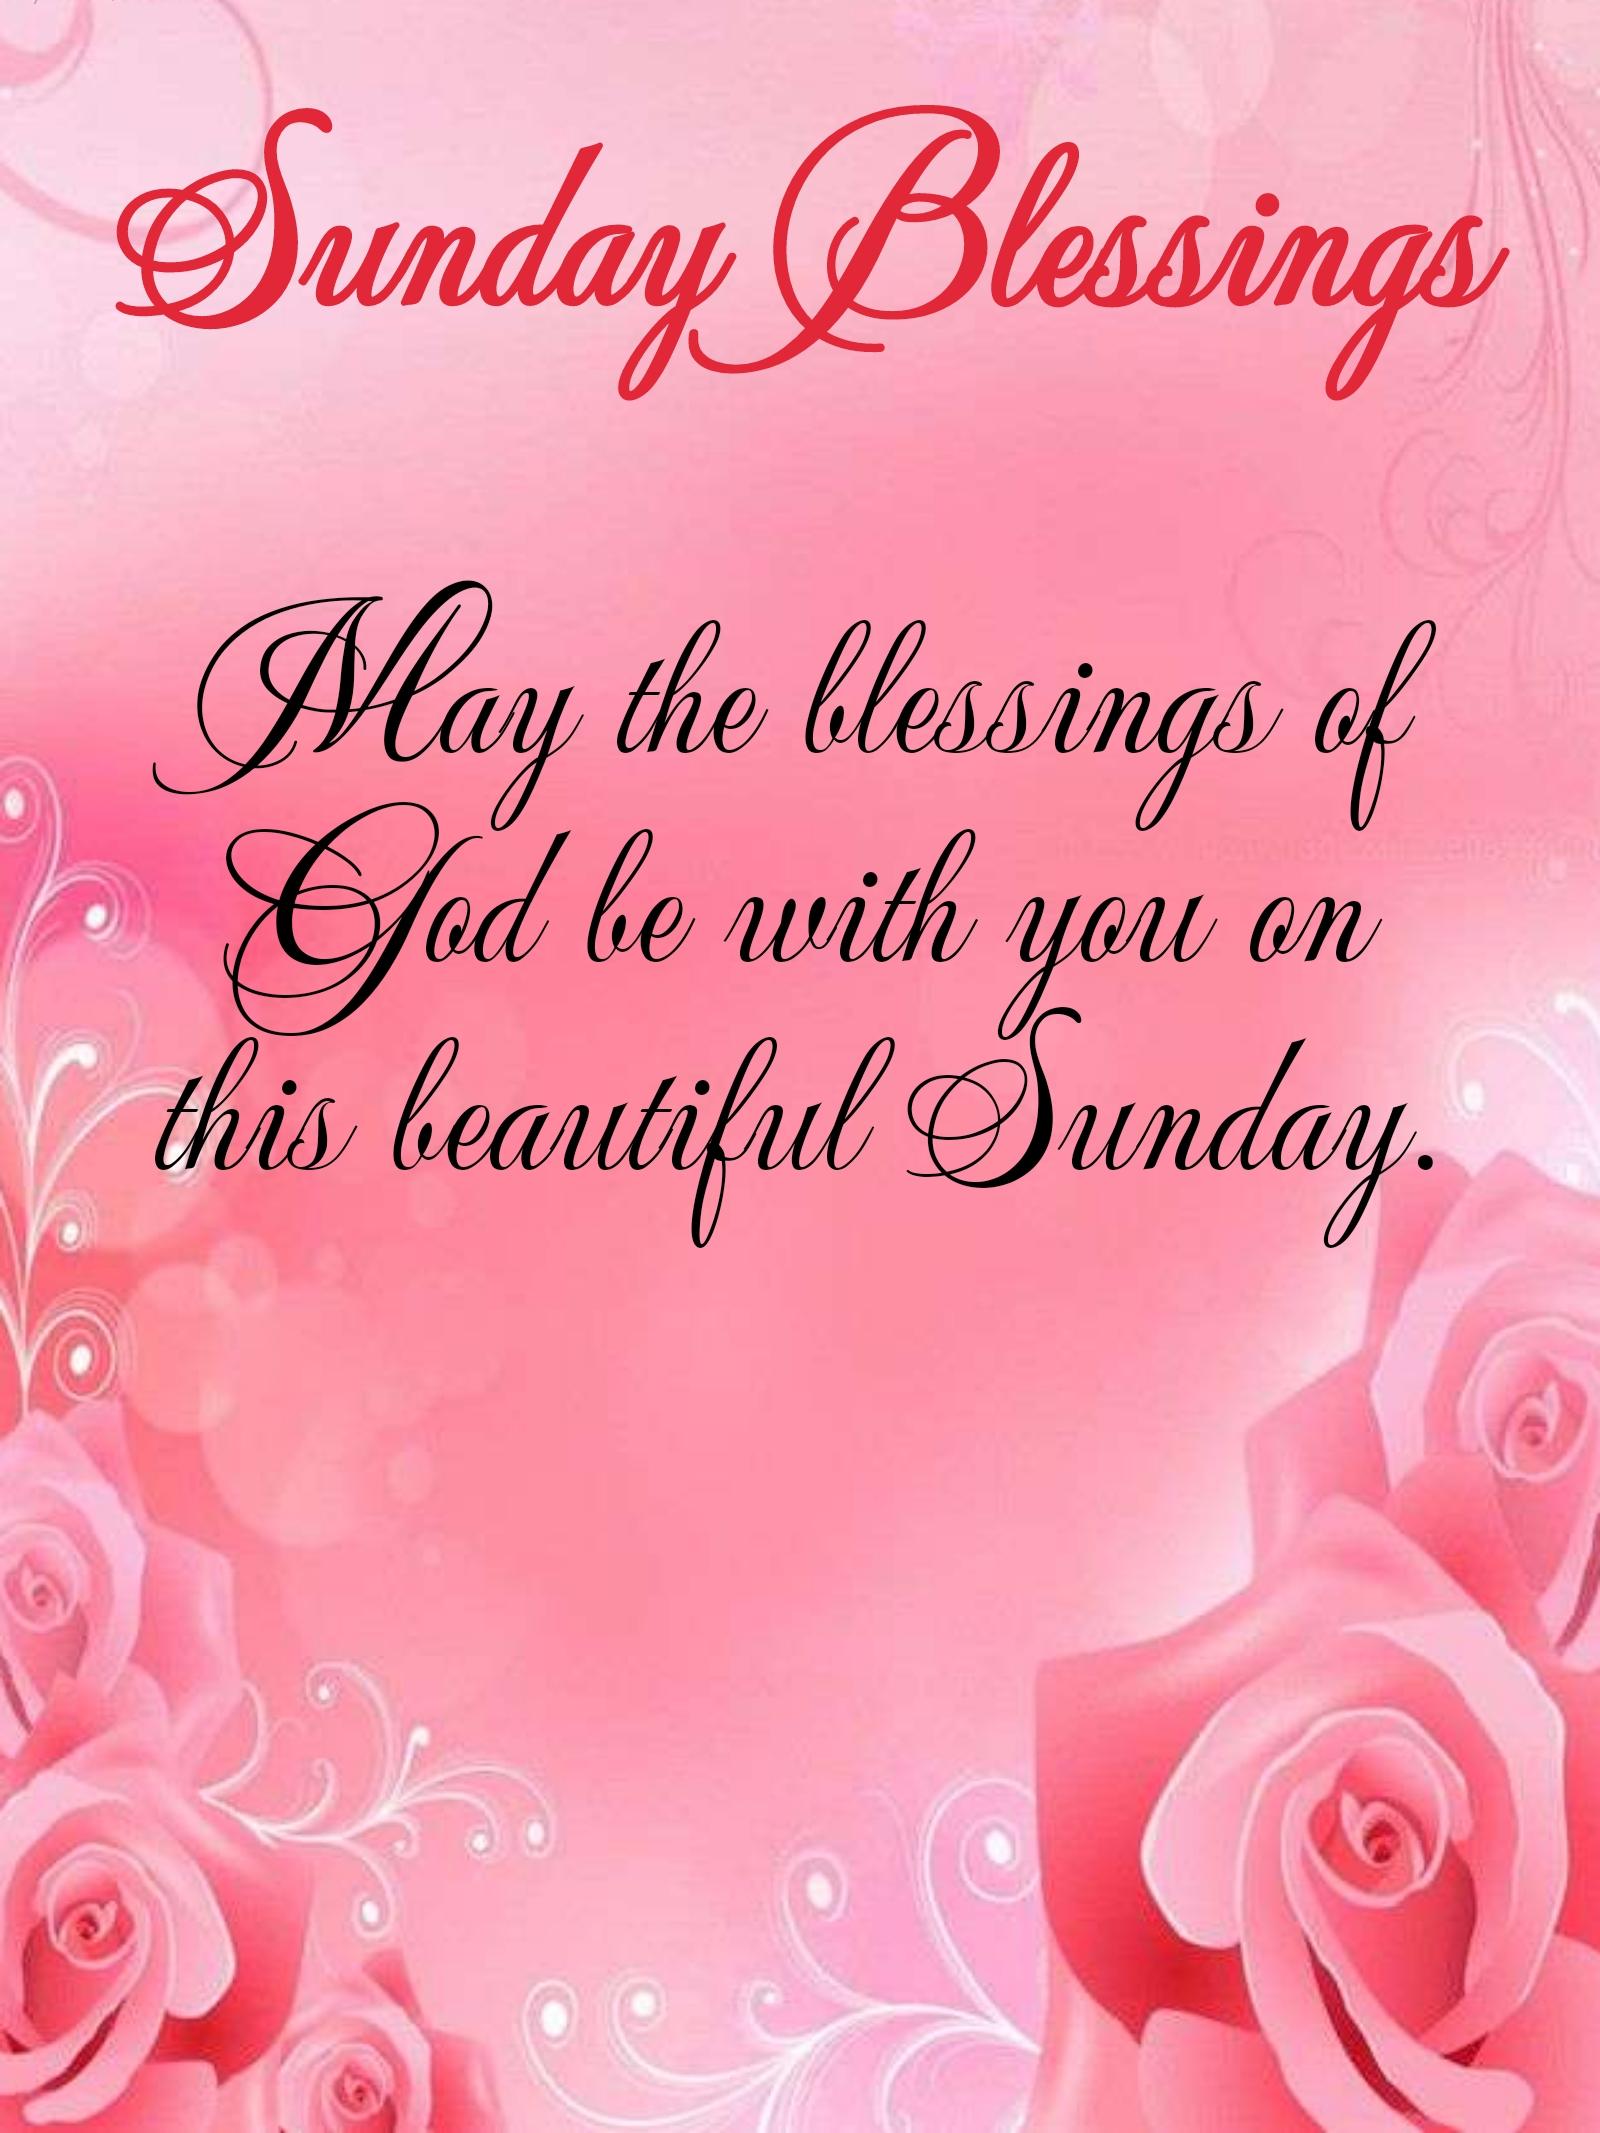 May the blessings of God be with you on this beautiful Sunday